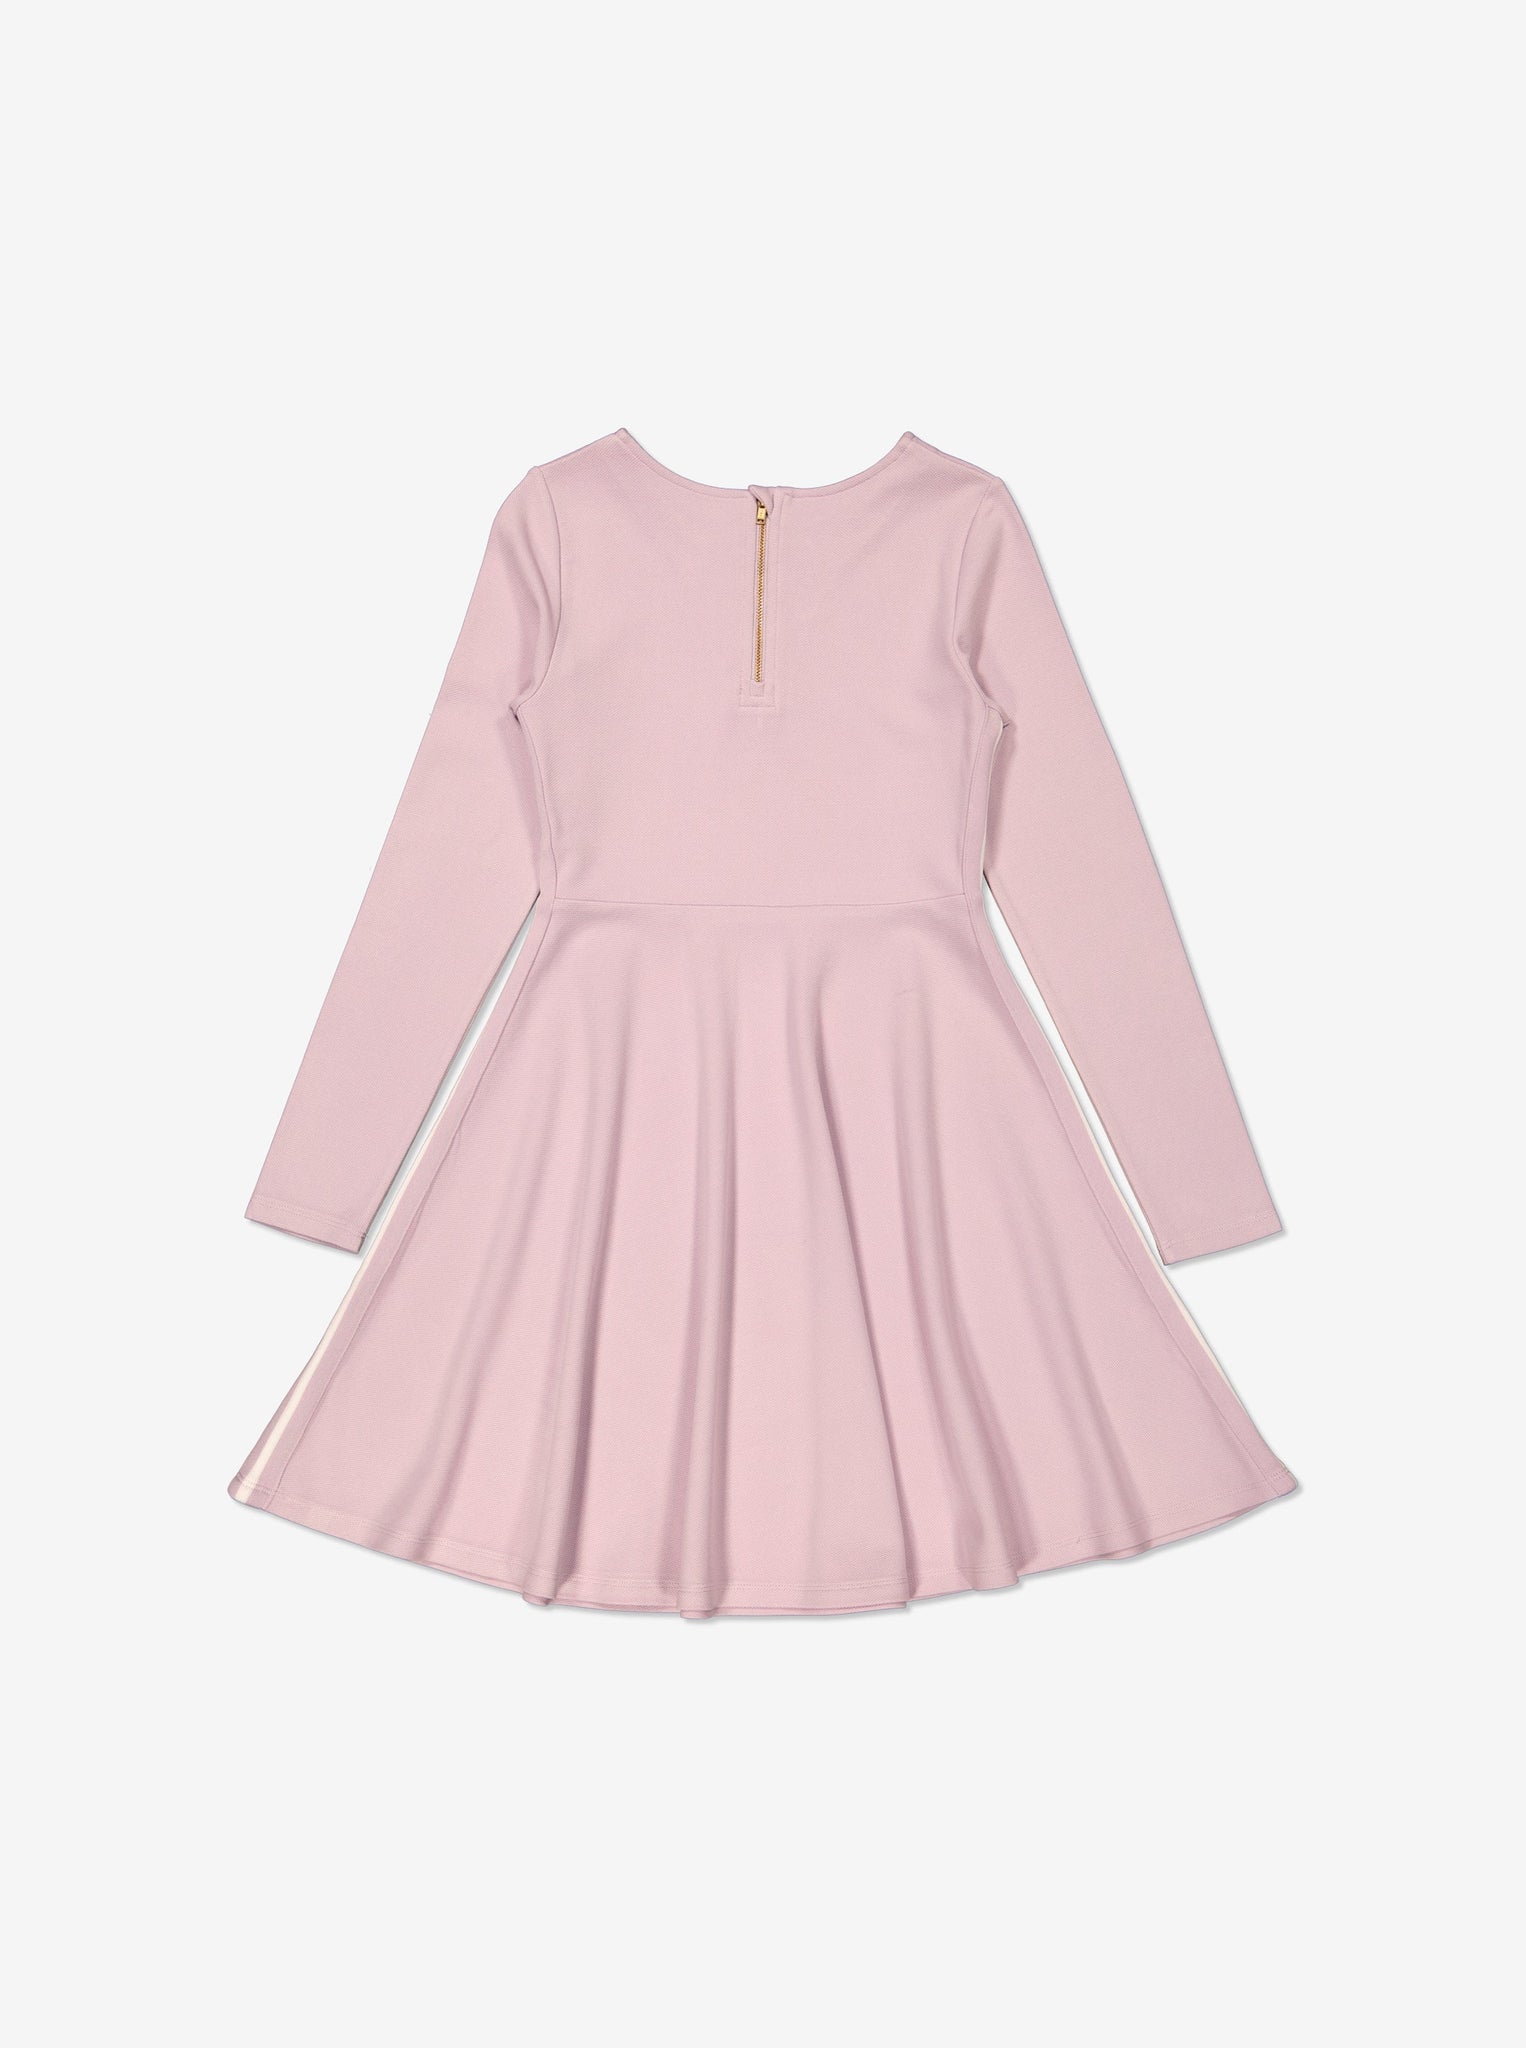  Girls Pink Twirl Dress from Polarn O. Pyret Kidswear. Made from sustainable materials.